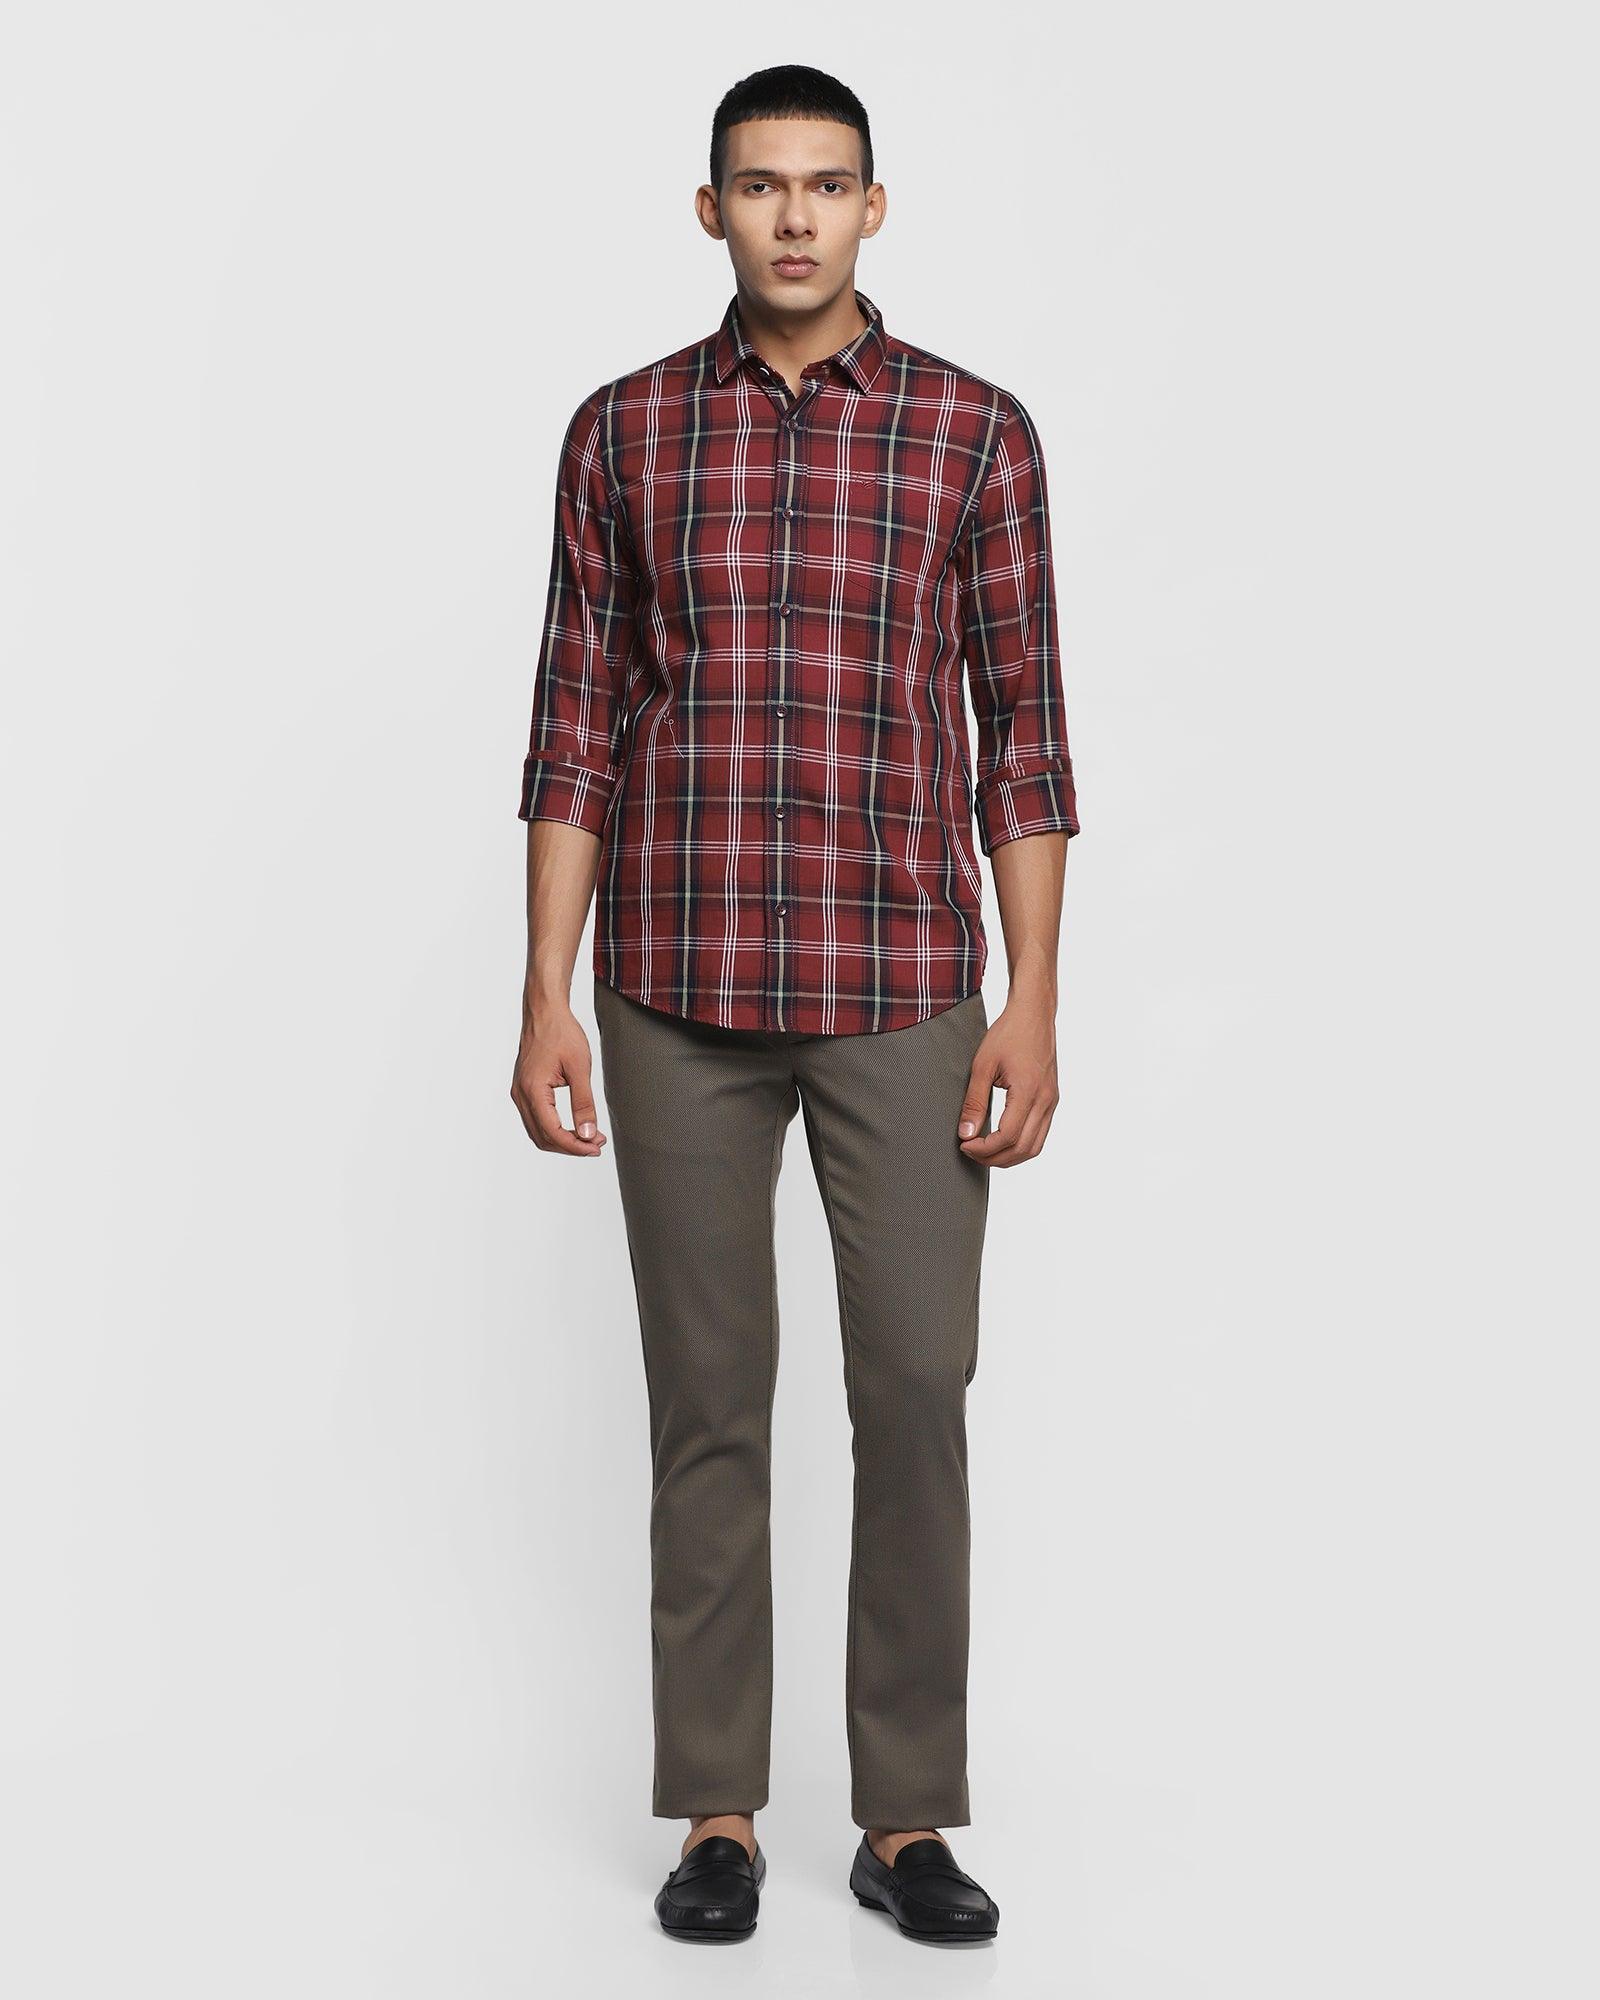 Casual Red Check Shirt - Lima